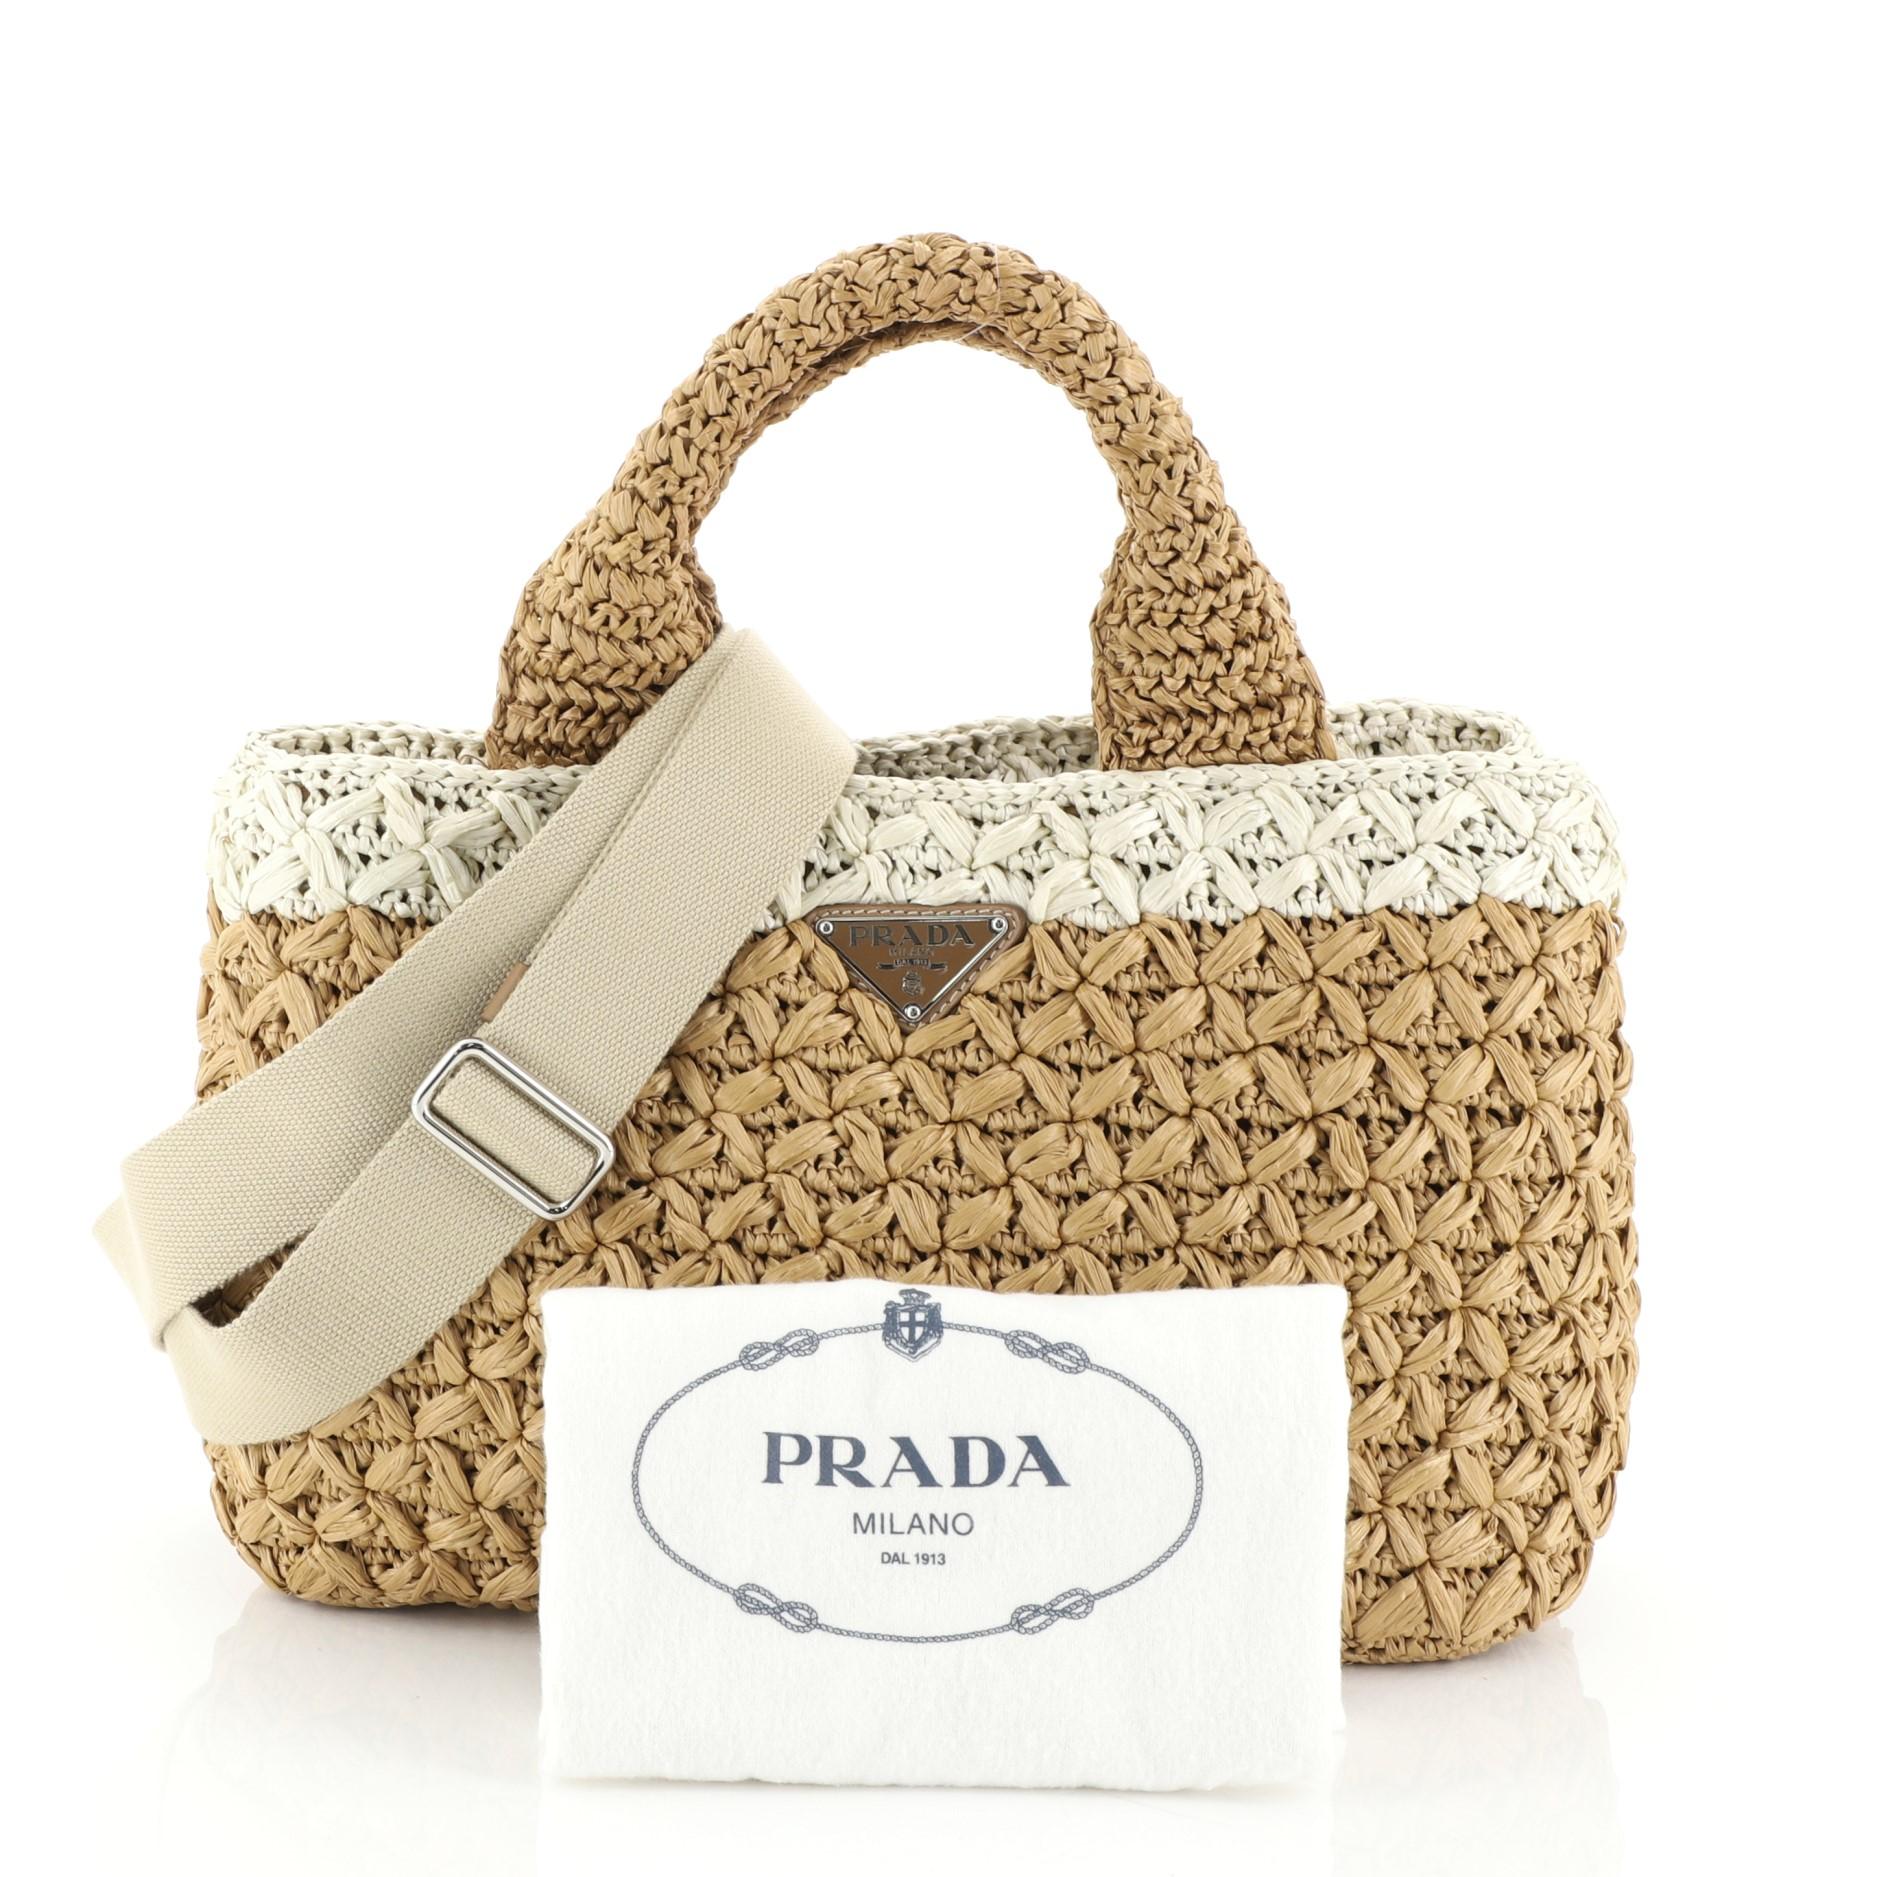 This Prada Convertible Open Tote Woven Raffia Small, crafted from neutral woven raffia, features dual top handles, inverted Prada triangle logo at the center, and silver-tone hardware. It opens to a neutral fabric interior. 

Condition: Great. Minor